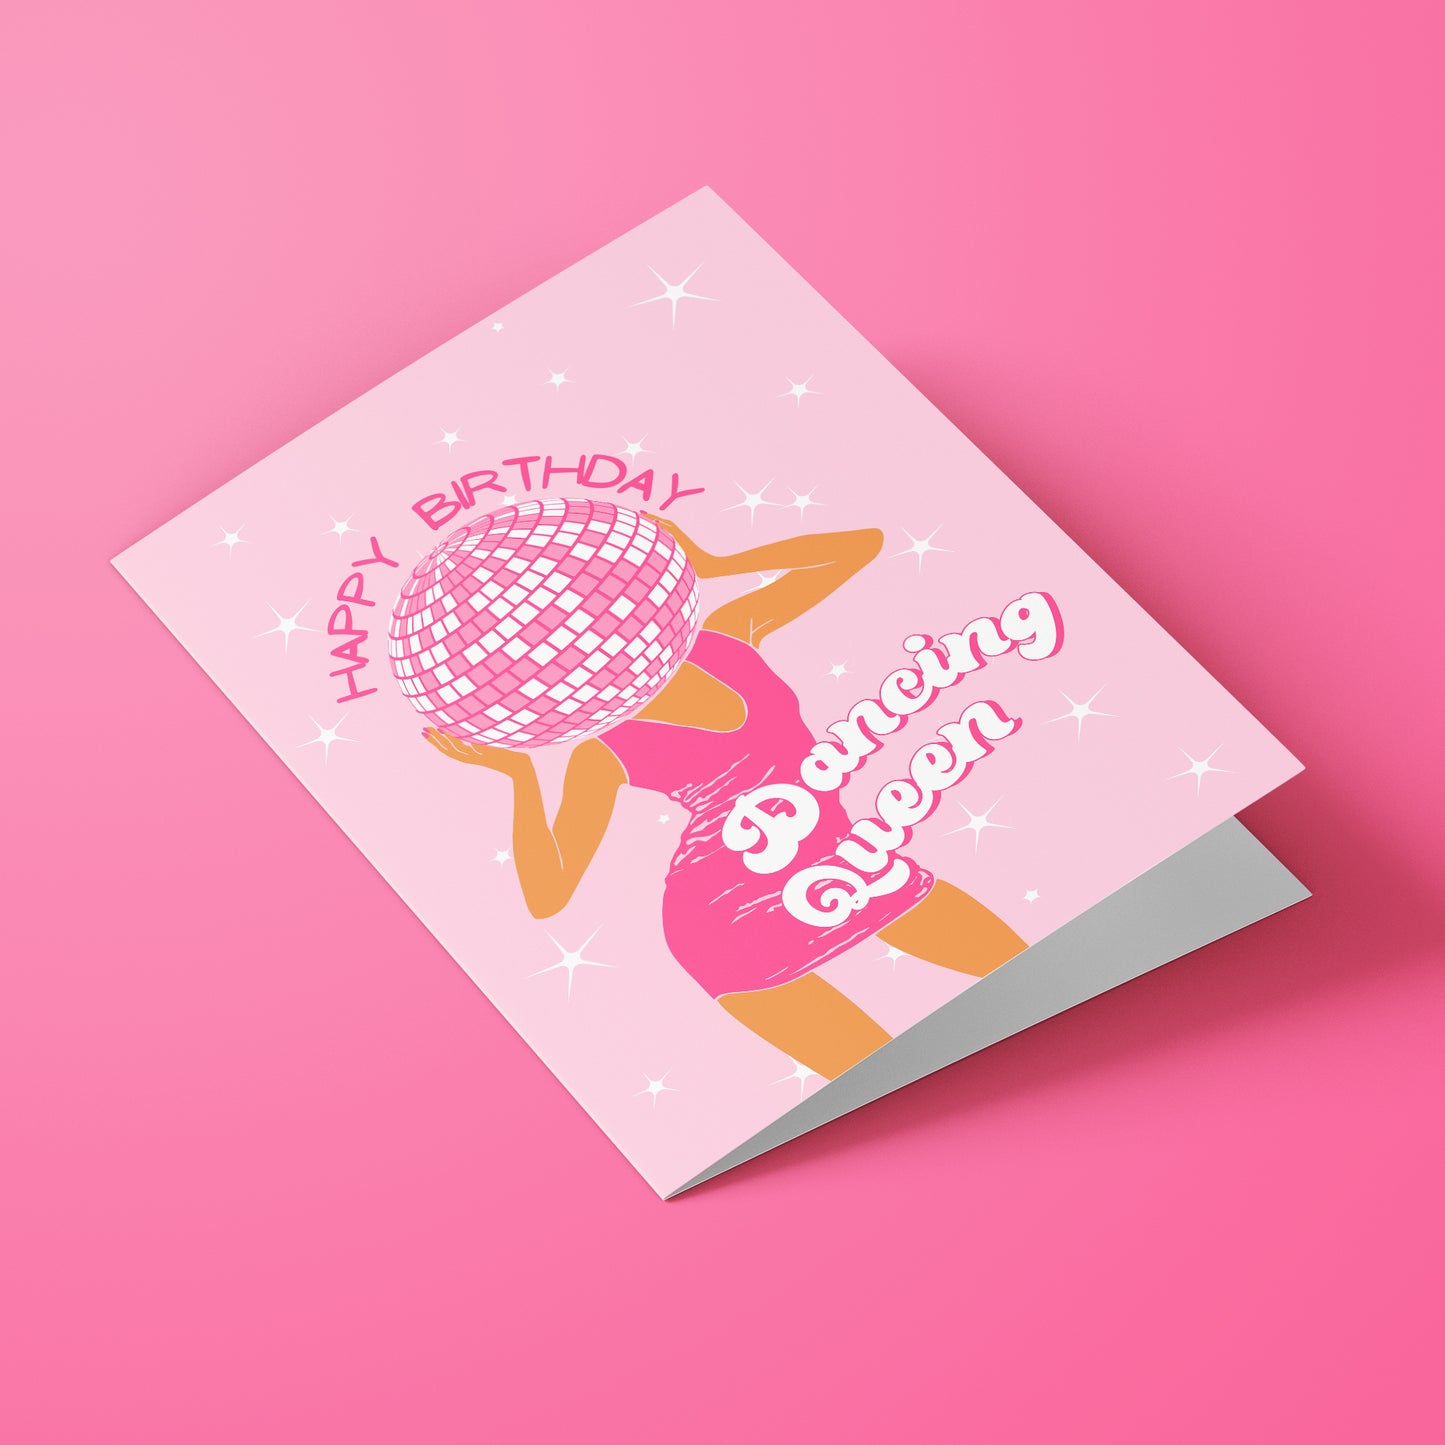 Dancing Queen Birthday Cards, Pack of 10 Birthday Cards, Disco Queen Bday Card - Pink